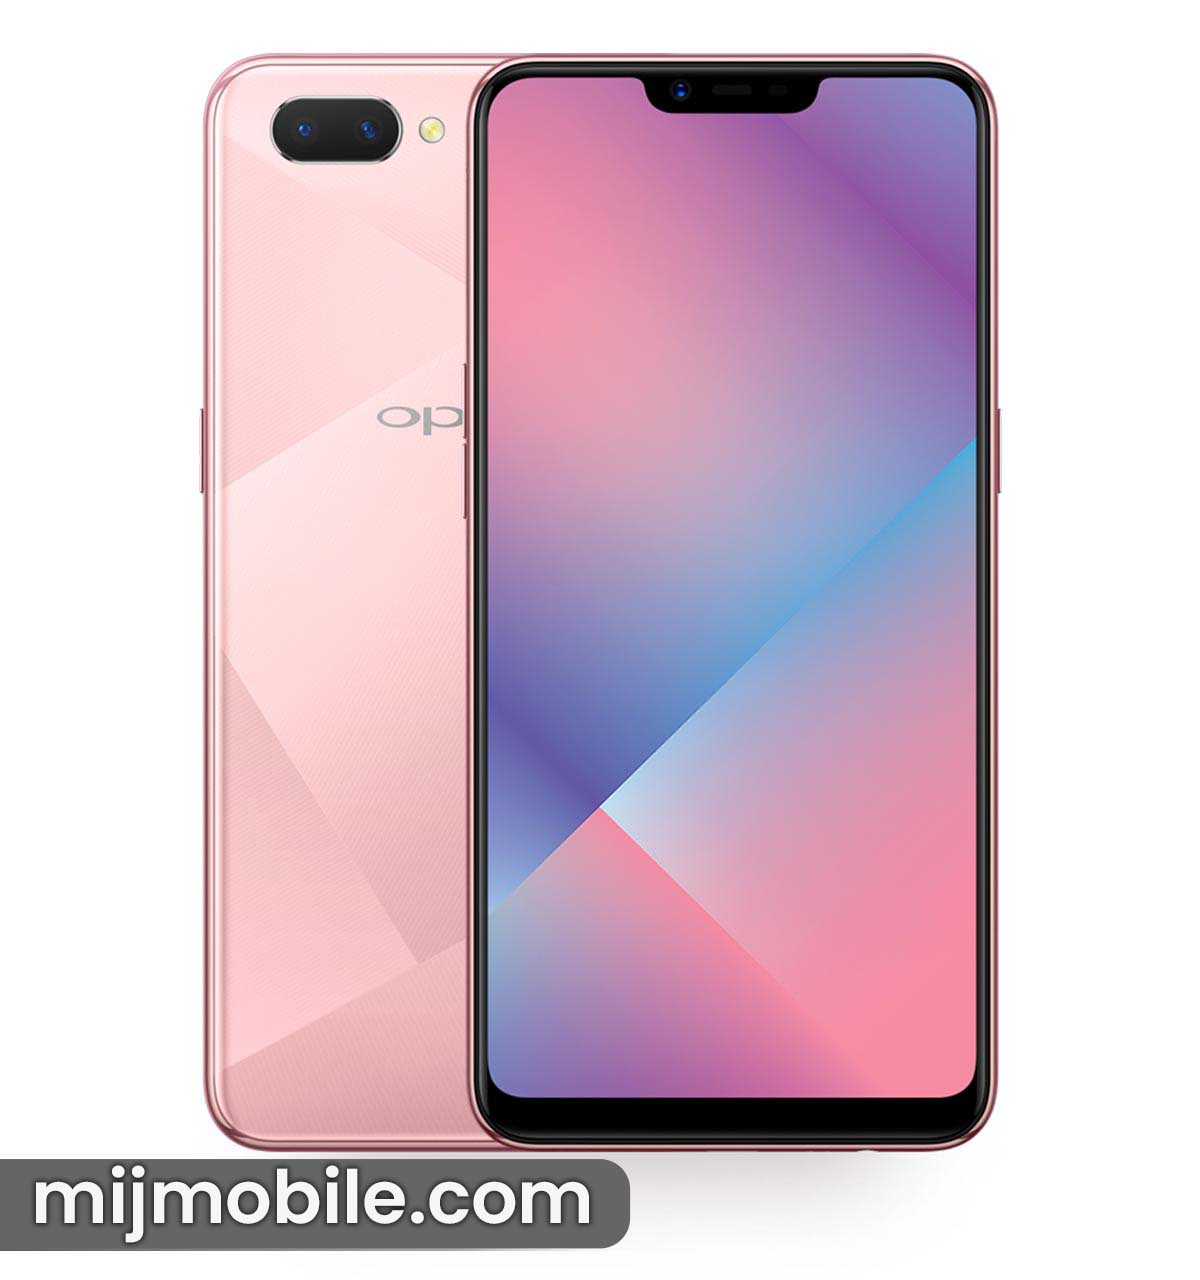 Oppo A5 2018 Price in Pakistan & Specifications Oppo A5 2018 Price in Pakistan is only 29,999.